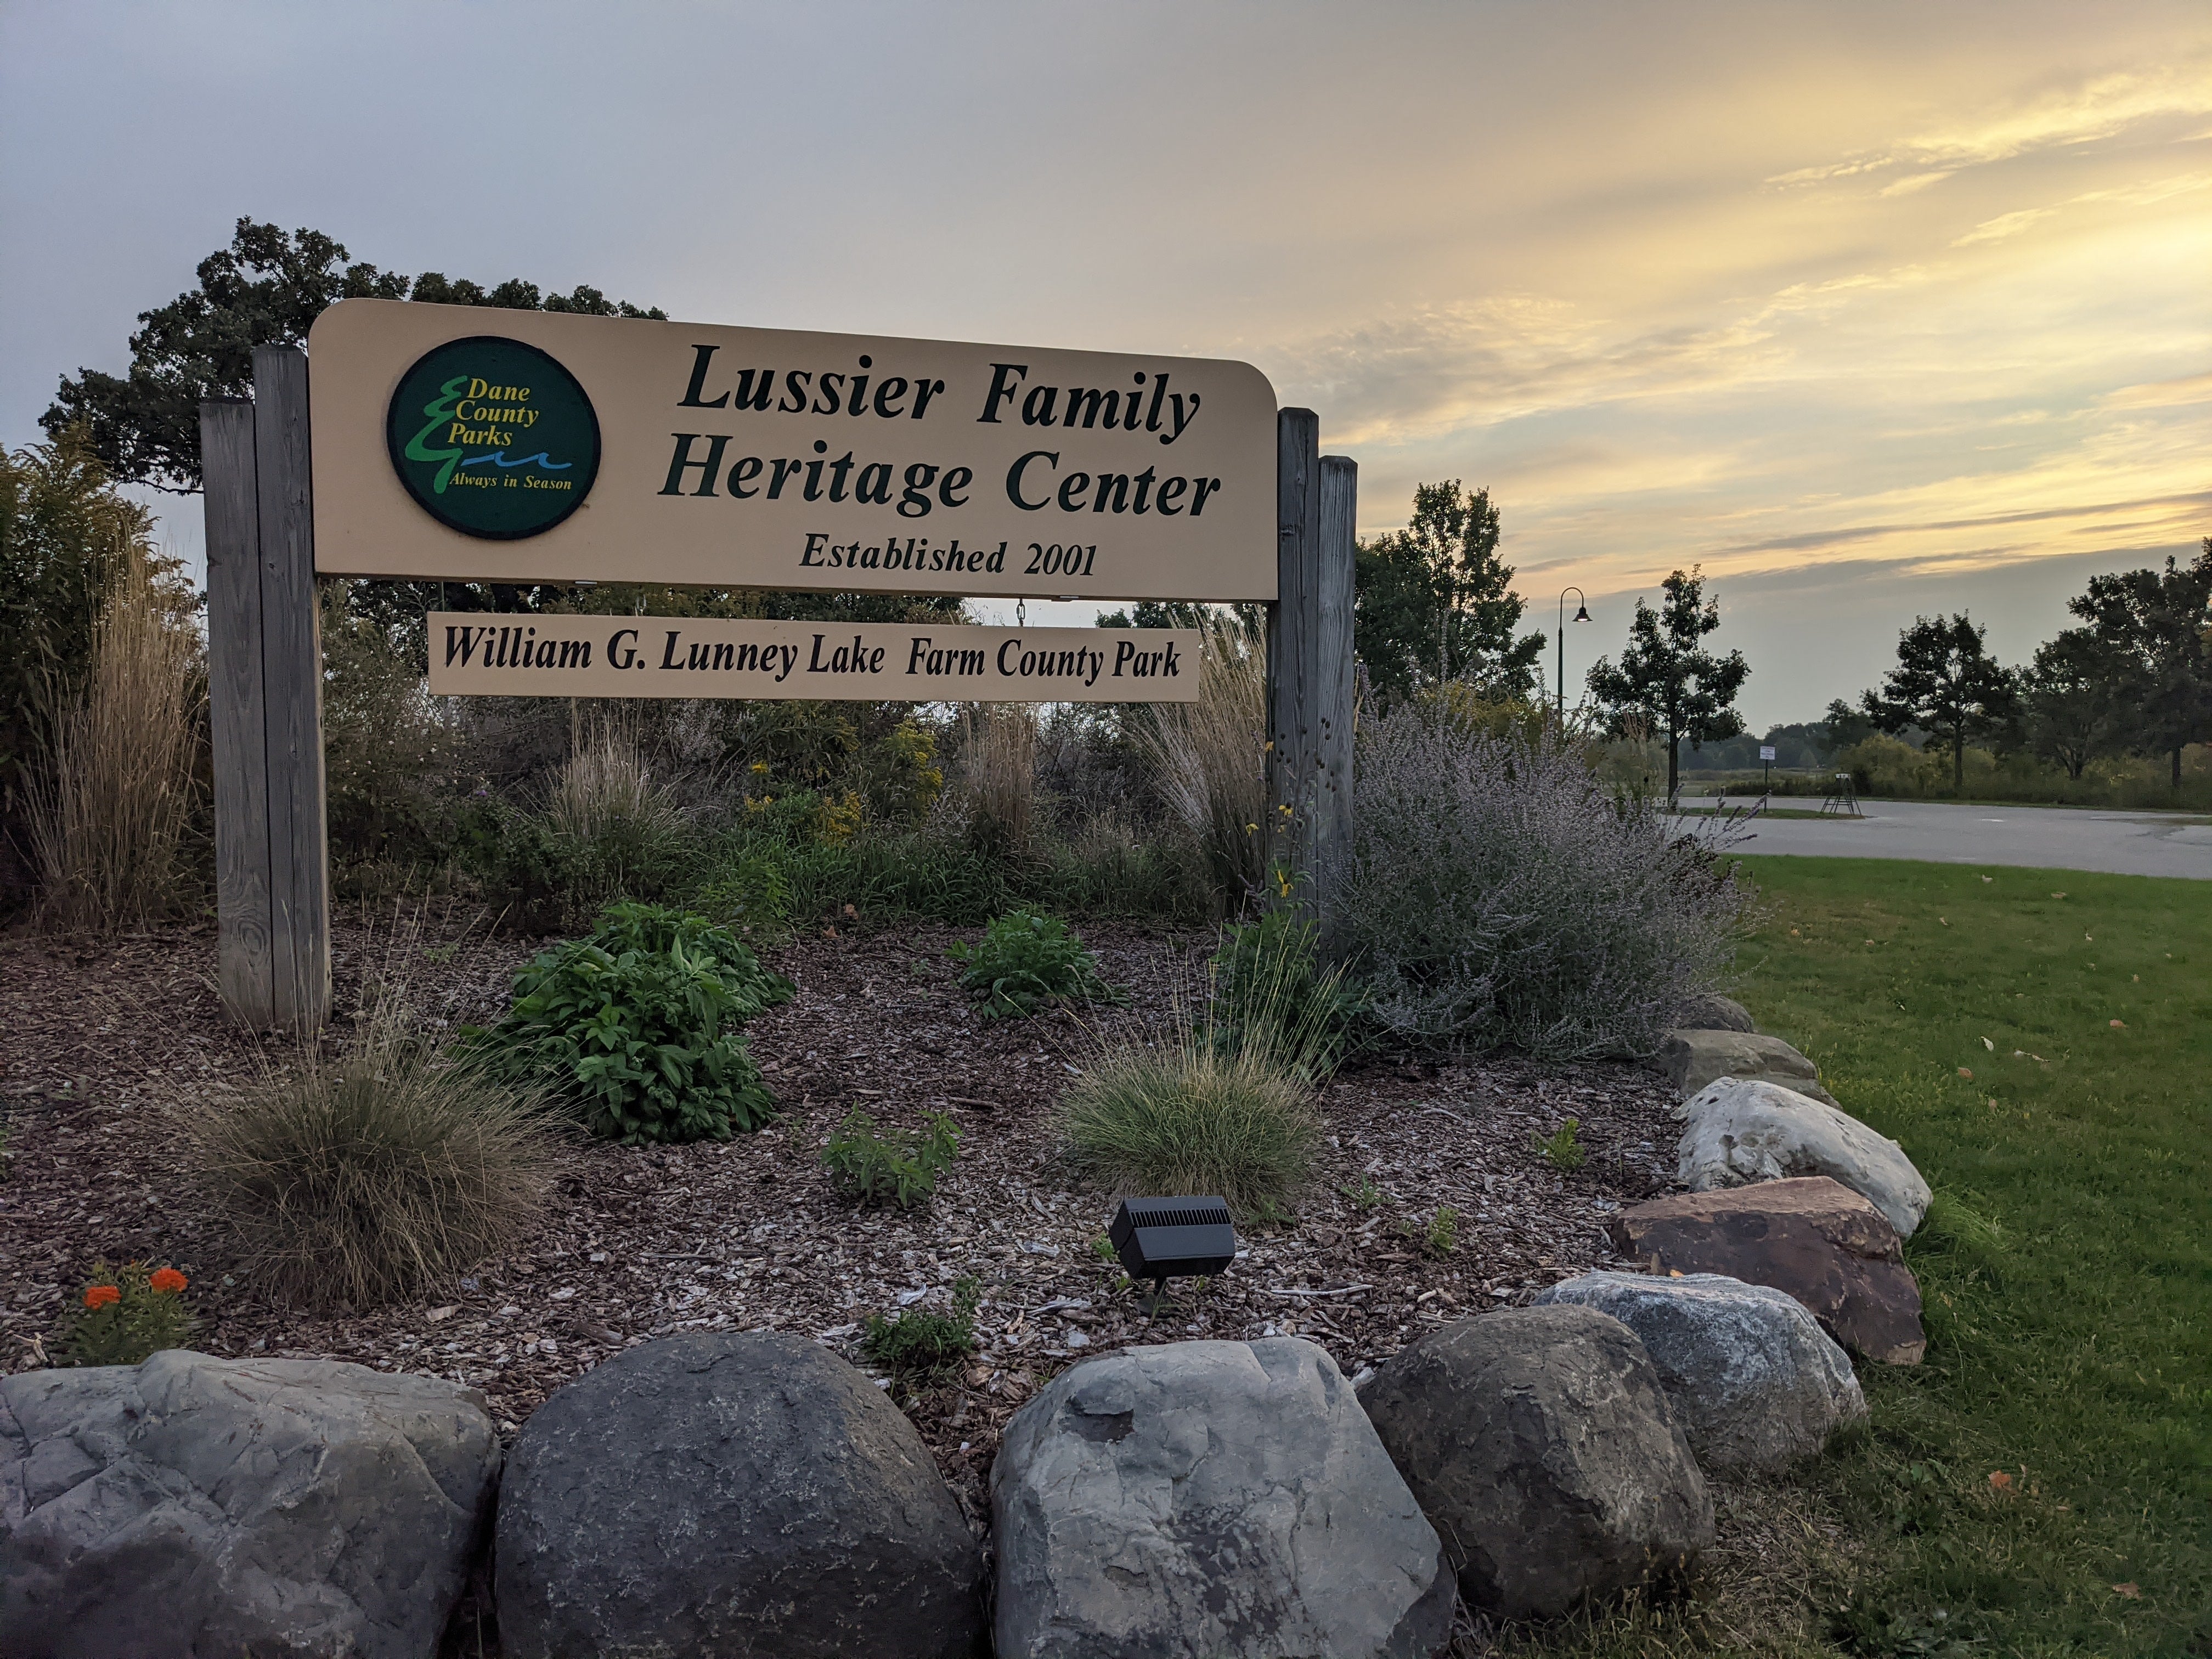 The best thing about my visit to this campground was the early morning sunrise cloud shot of the sign.